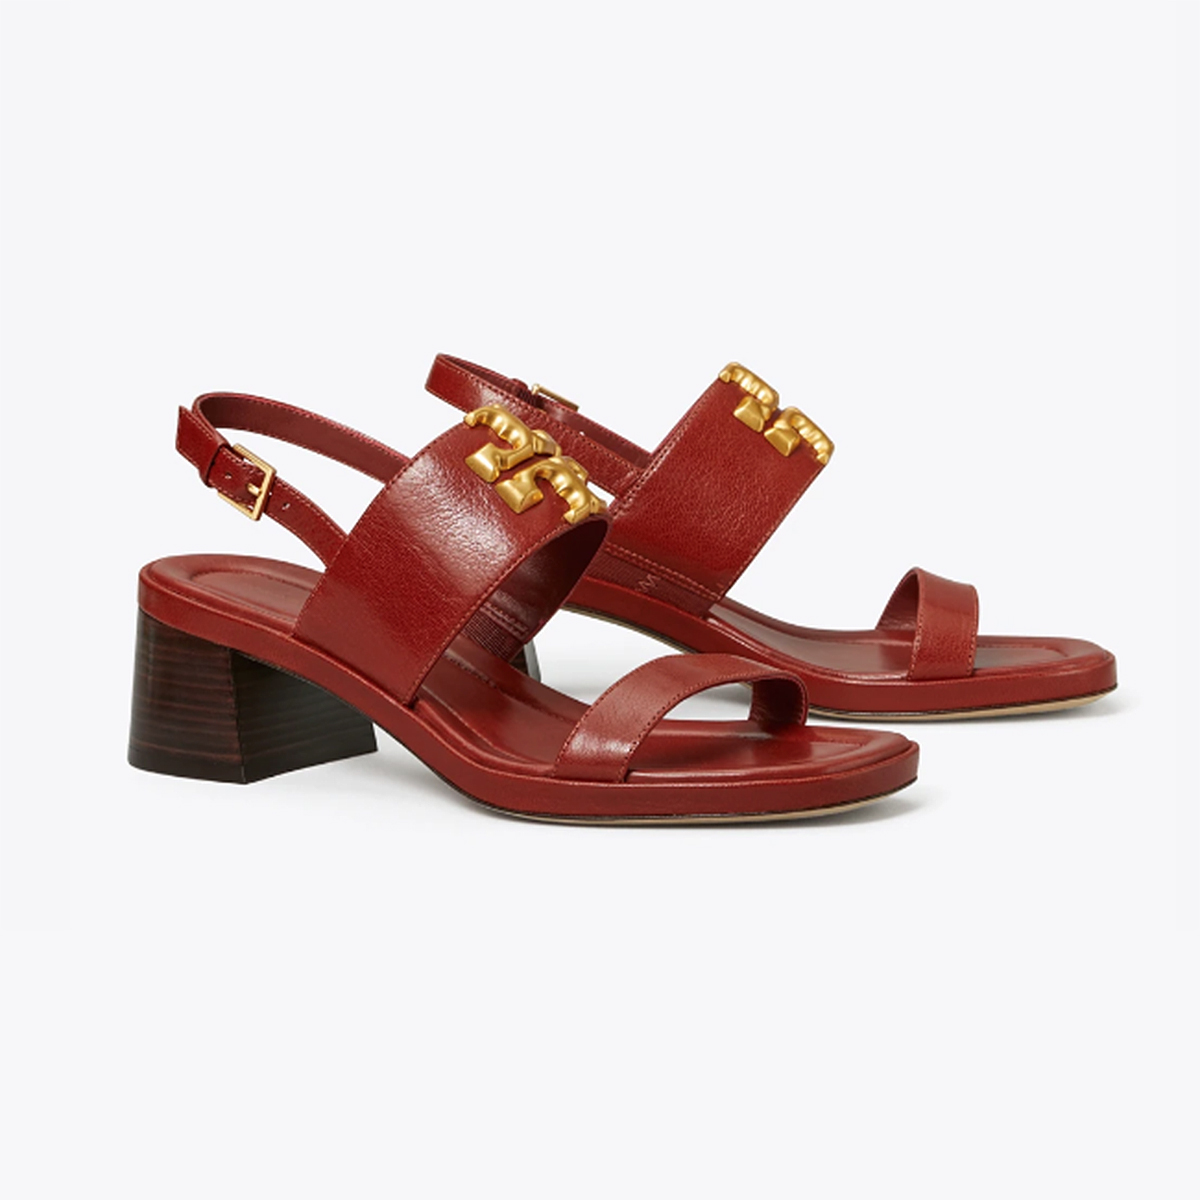 Tory Burch: 10 of the Best New Markdowns